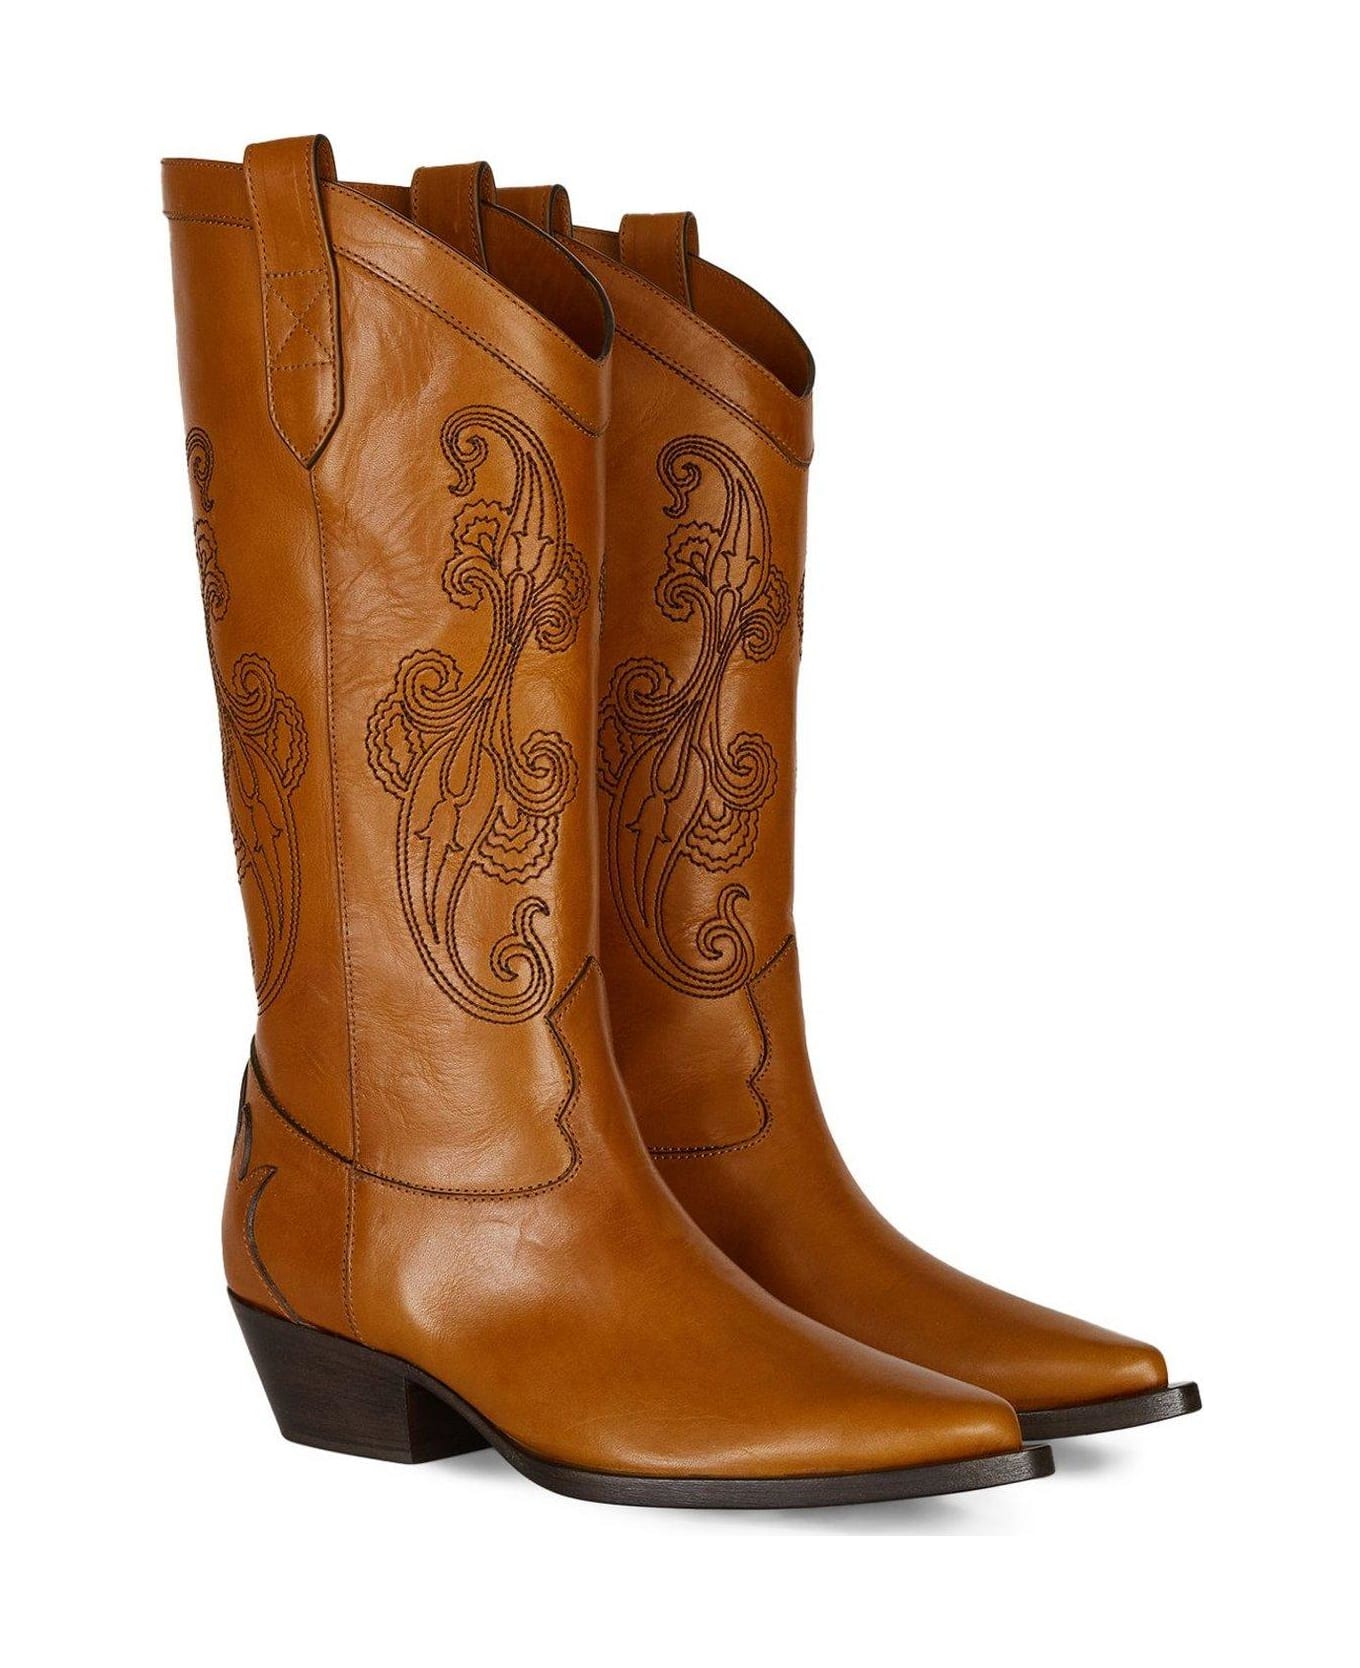 Etro Pointed-toe Knee-length Boots - BROWN ブーツ